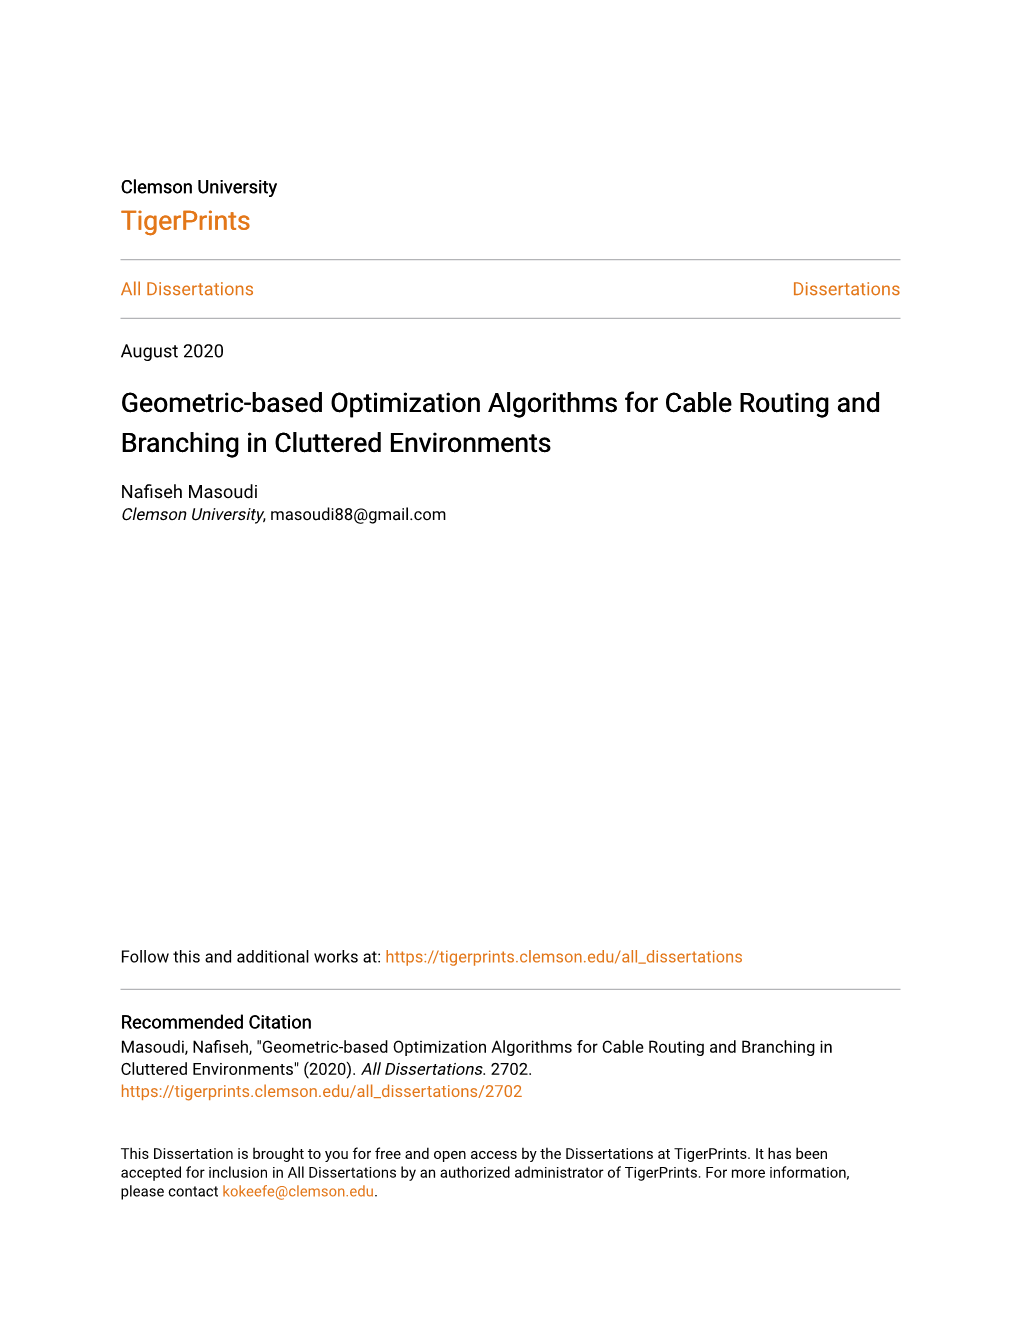 Geometric-Based Optimization Algorithms for Cable Routing and Branching in Cluttered Environments